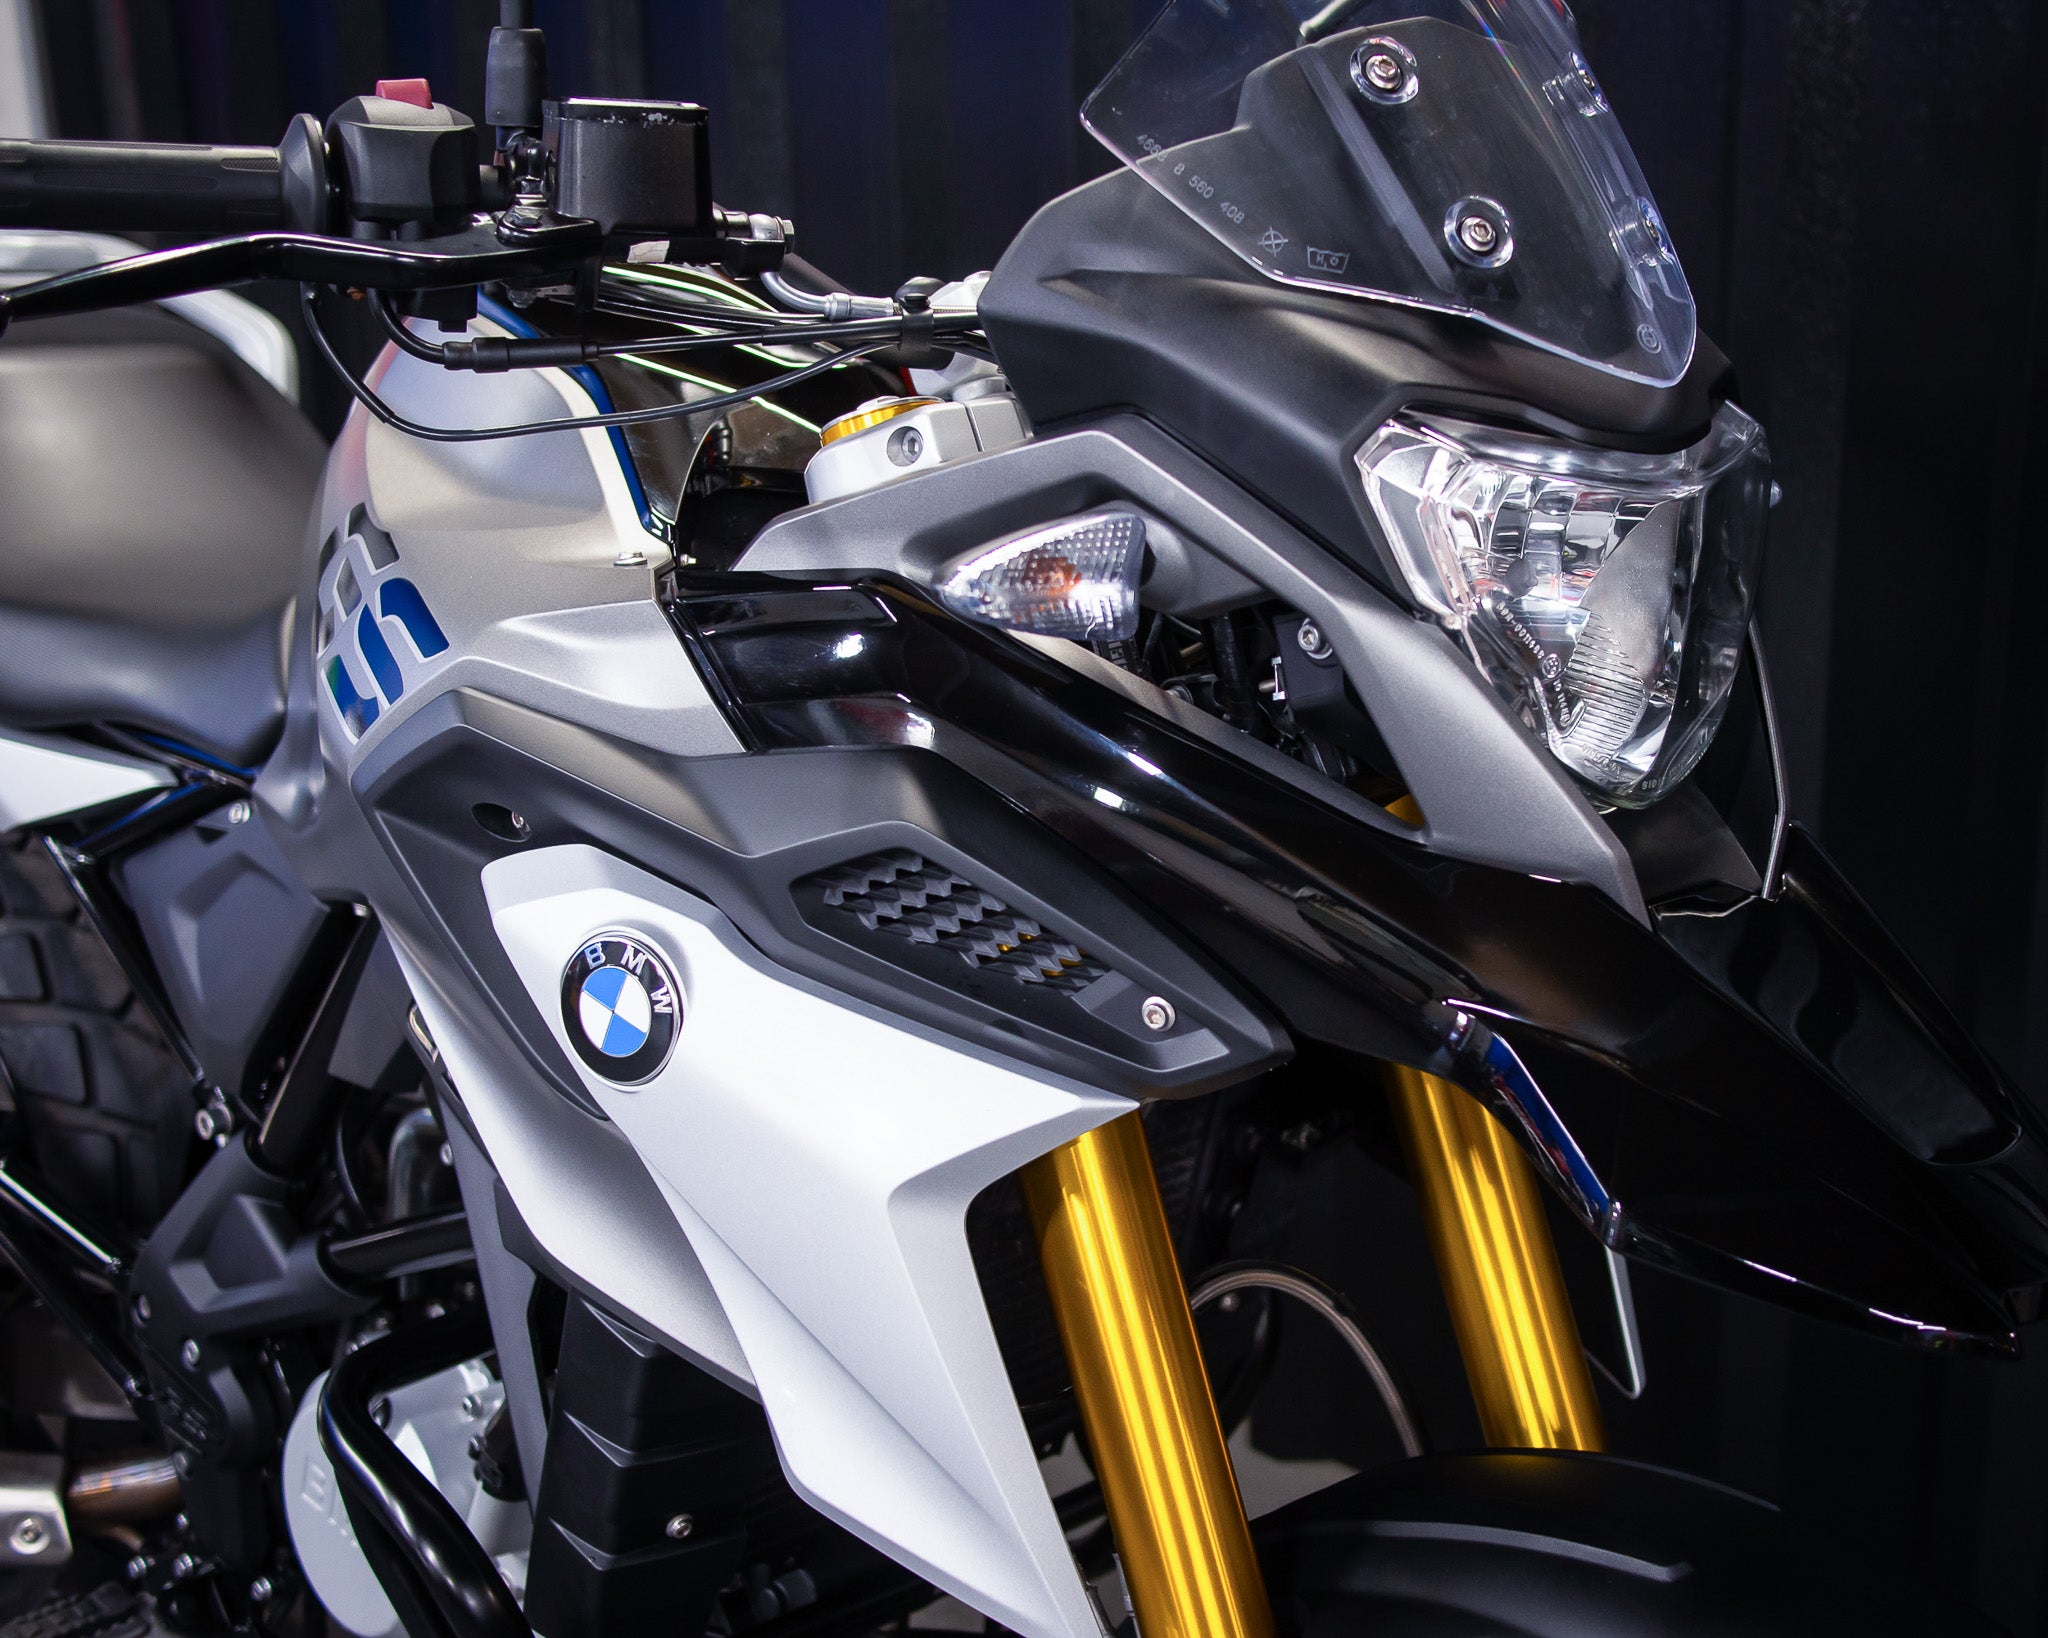 Approved Used 2019 BMW G 310 GS Lightweight Adventure Bike